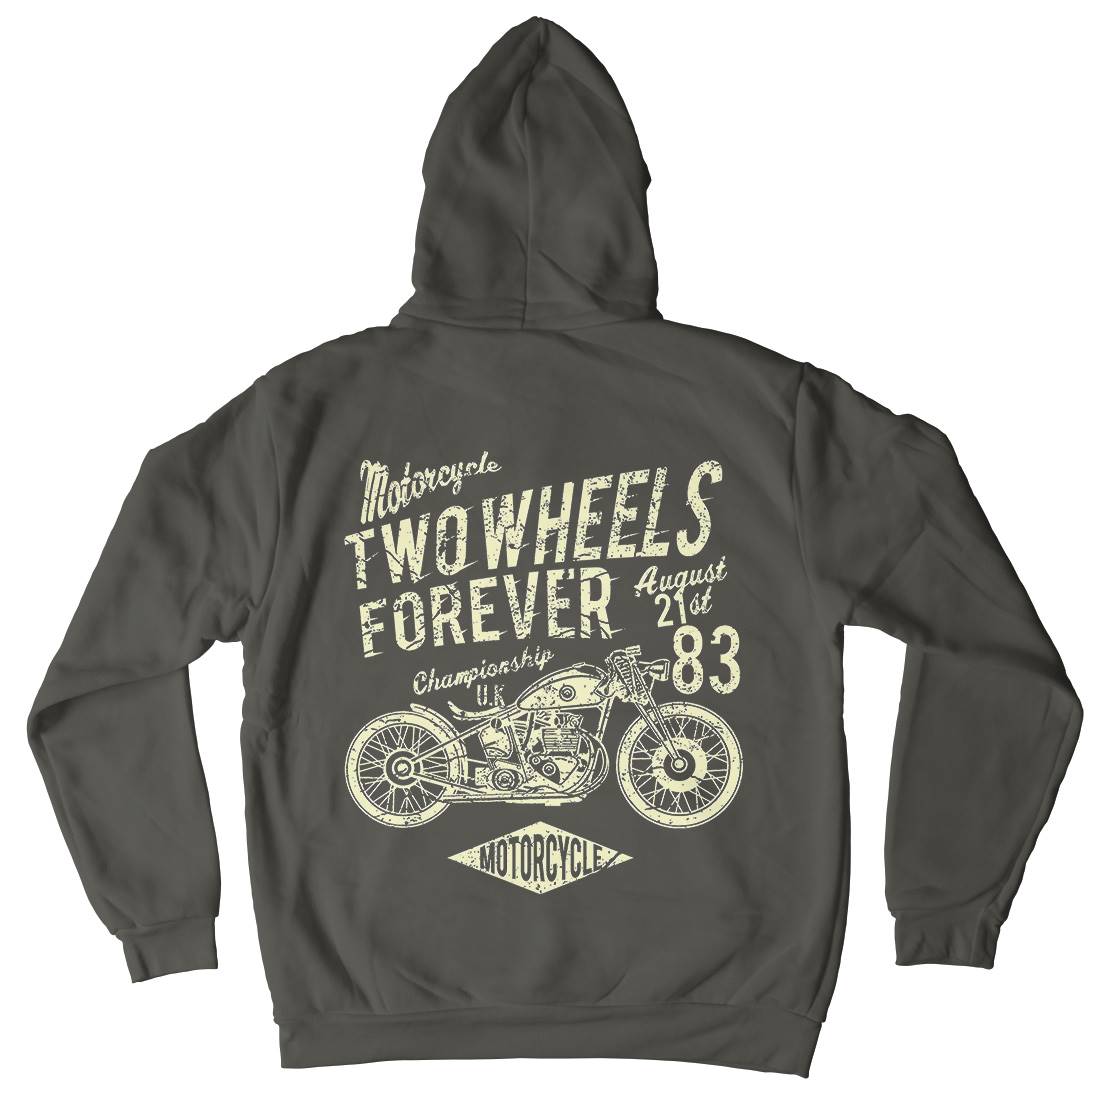 Two Wheels Forever Mens Hoodie With Pocket Motorcycles A186